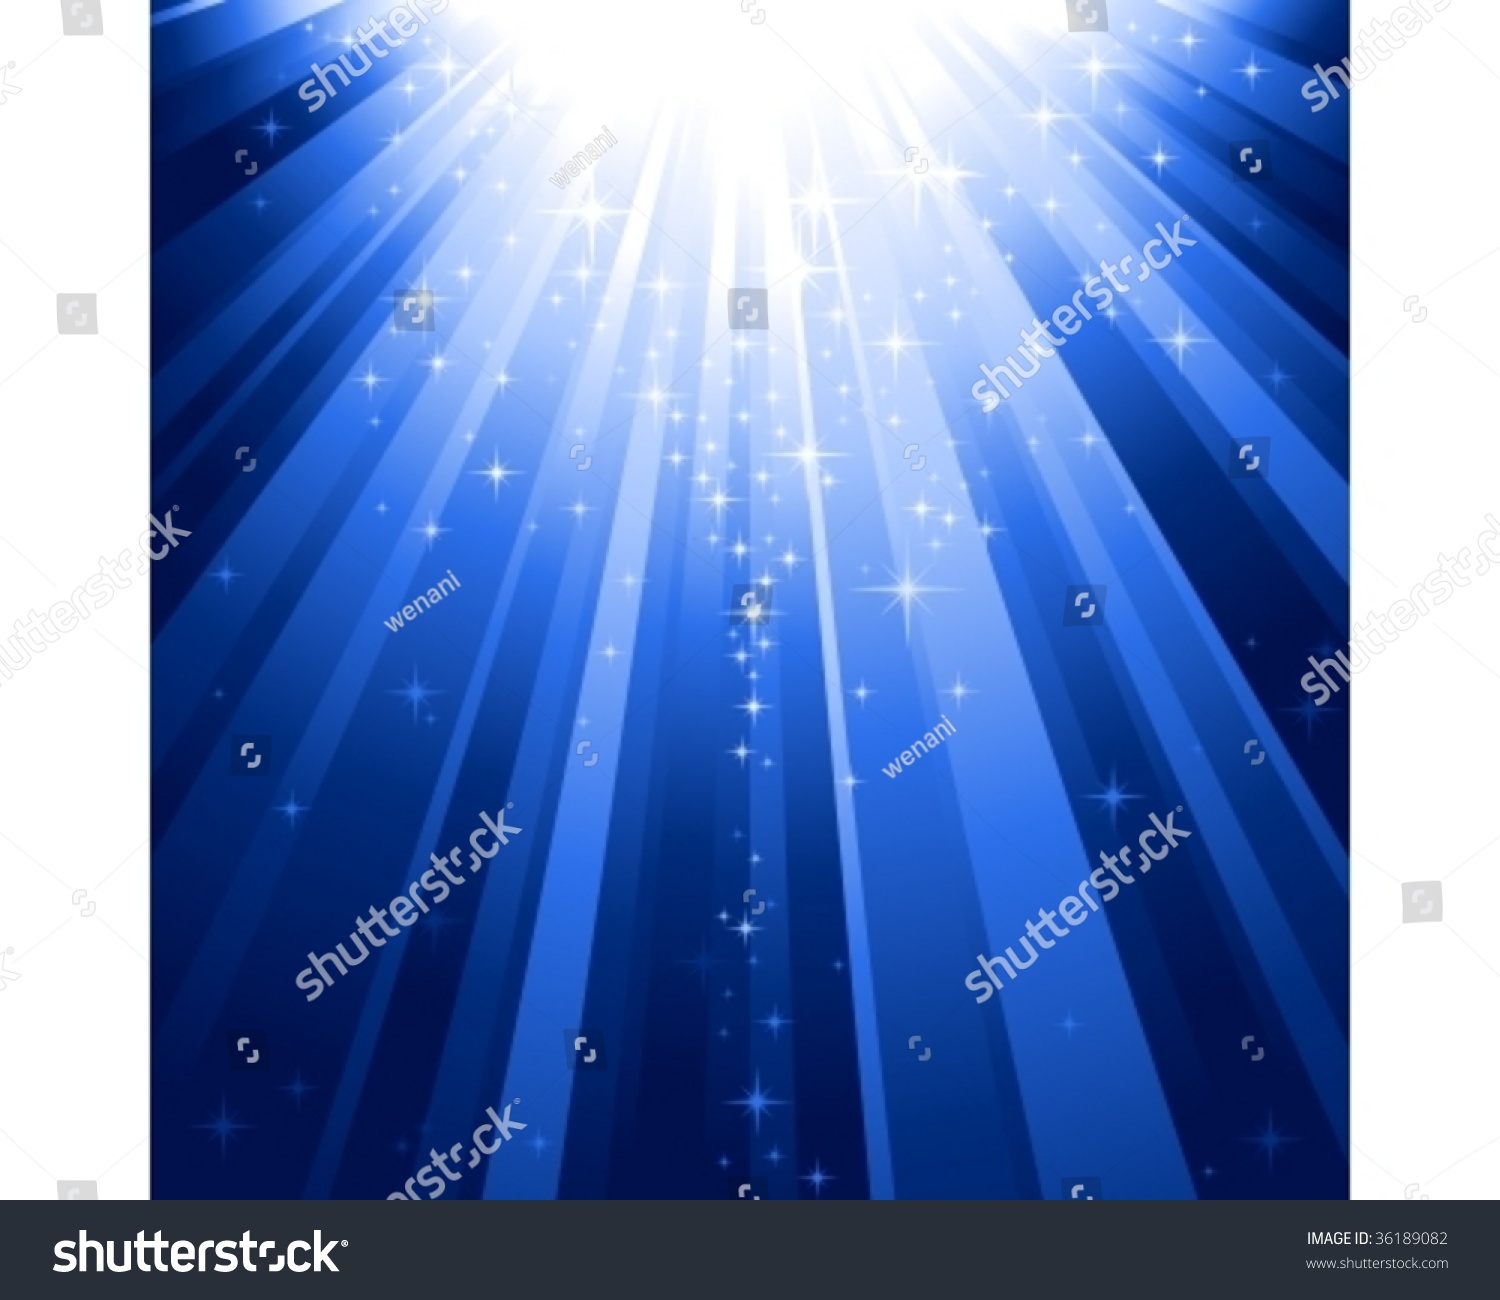 Festive Blue Square Abstract Background With Stars Descending On Rays ...